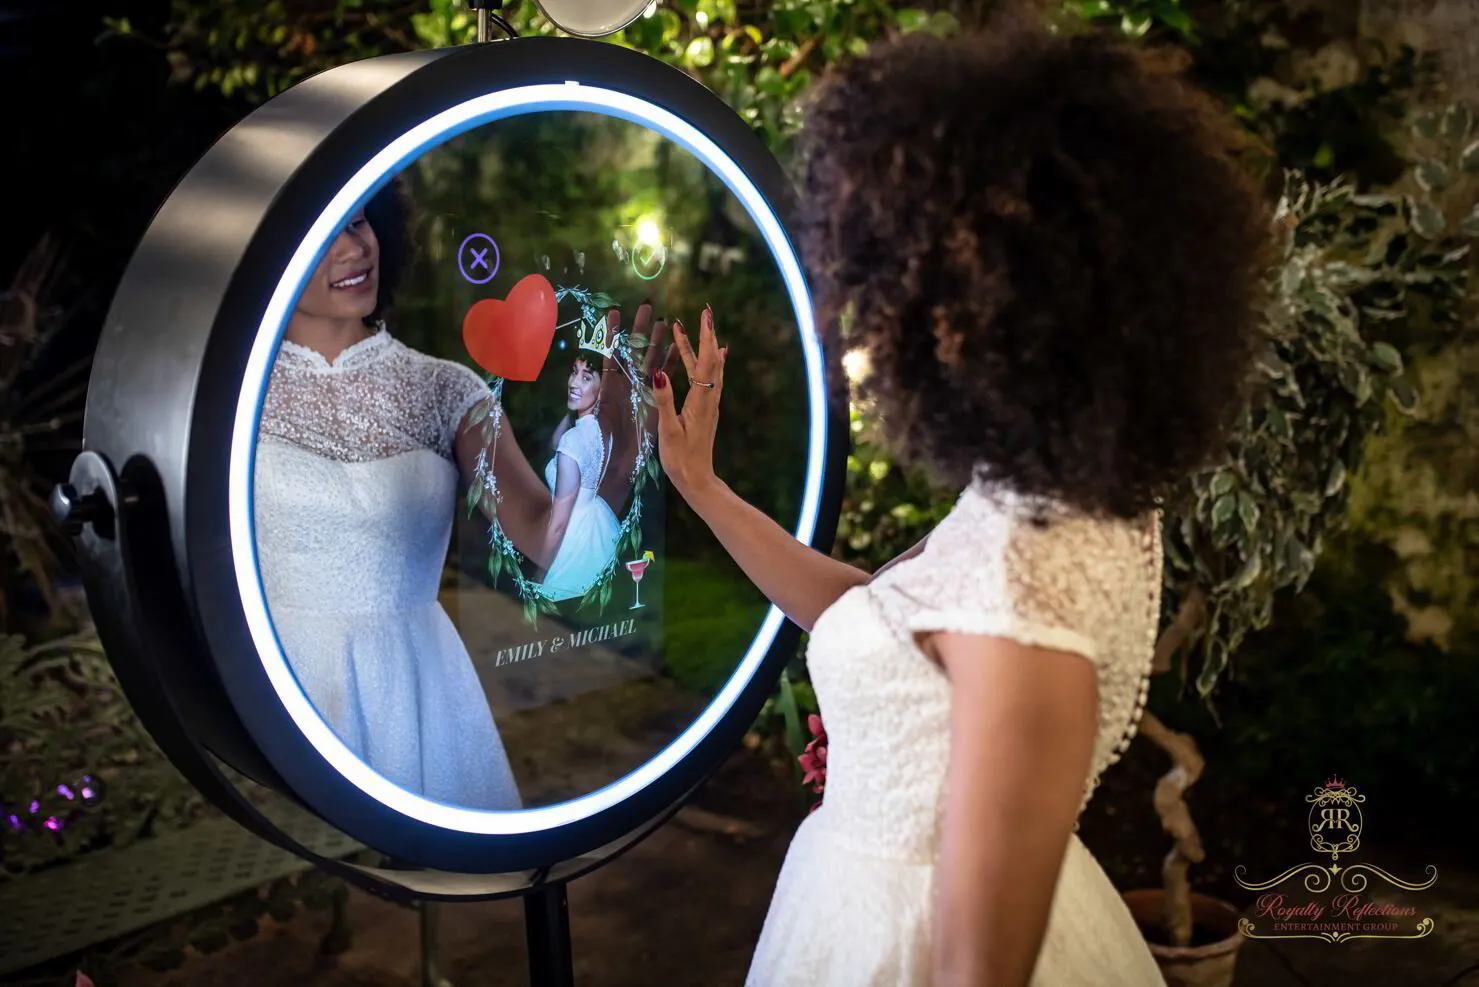 beauty mirror photo booth rental - royal reflections event rentals